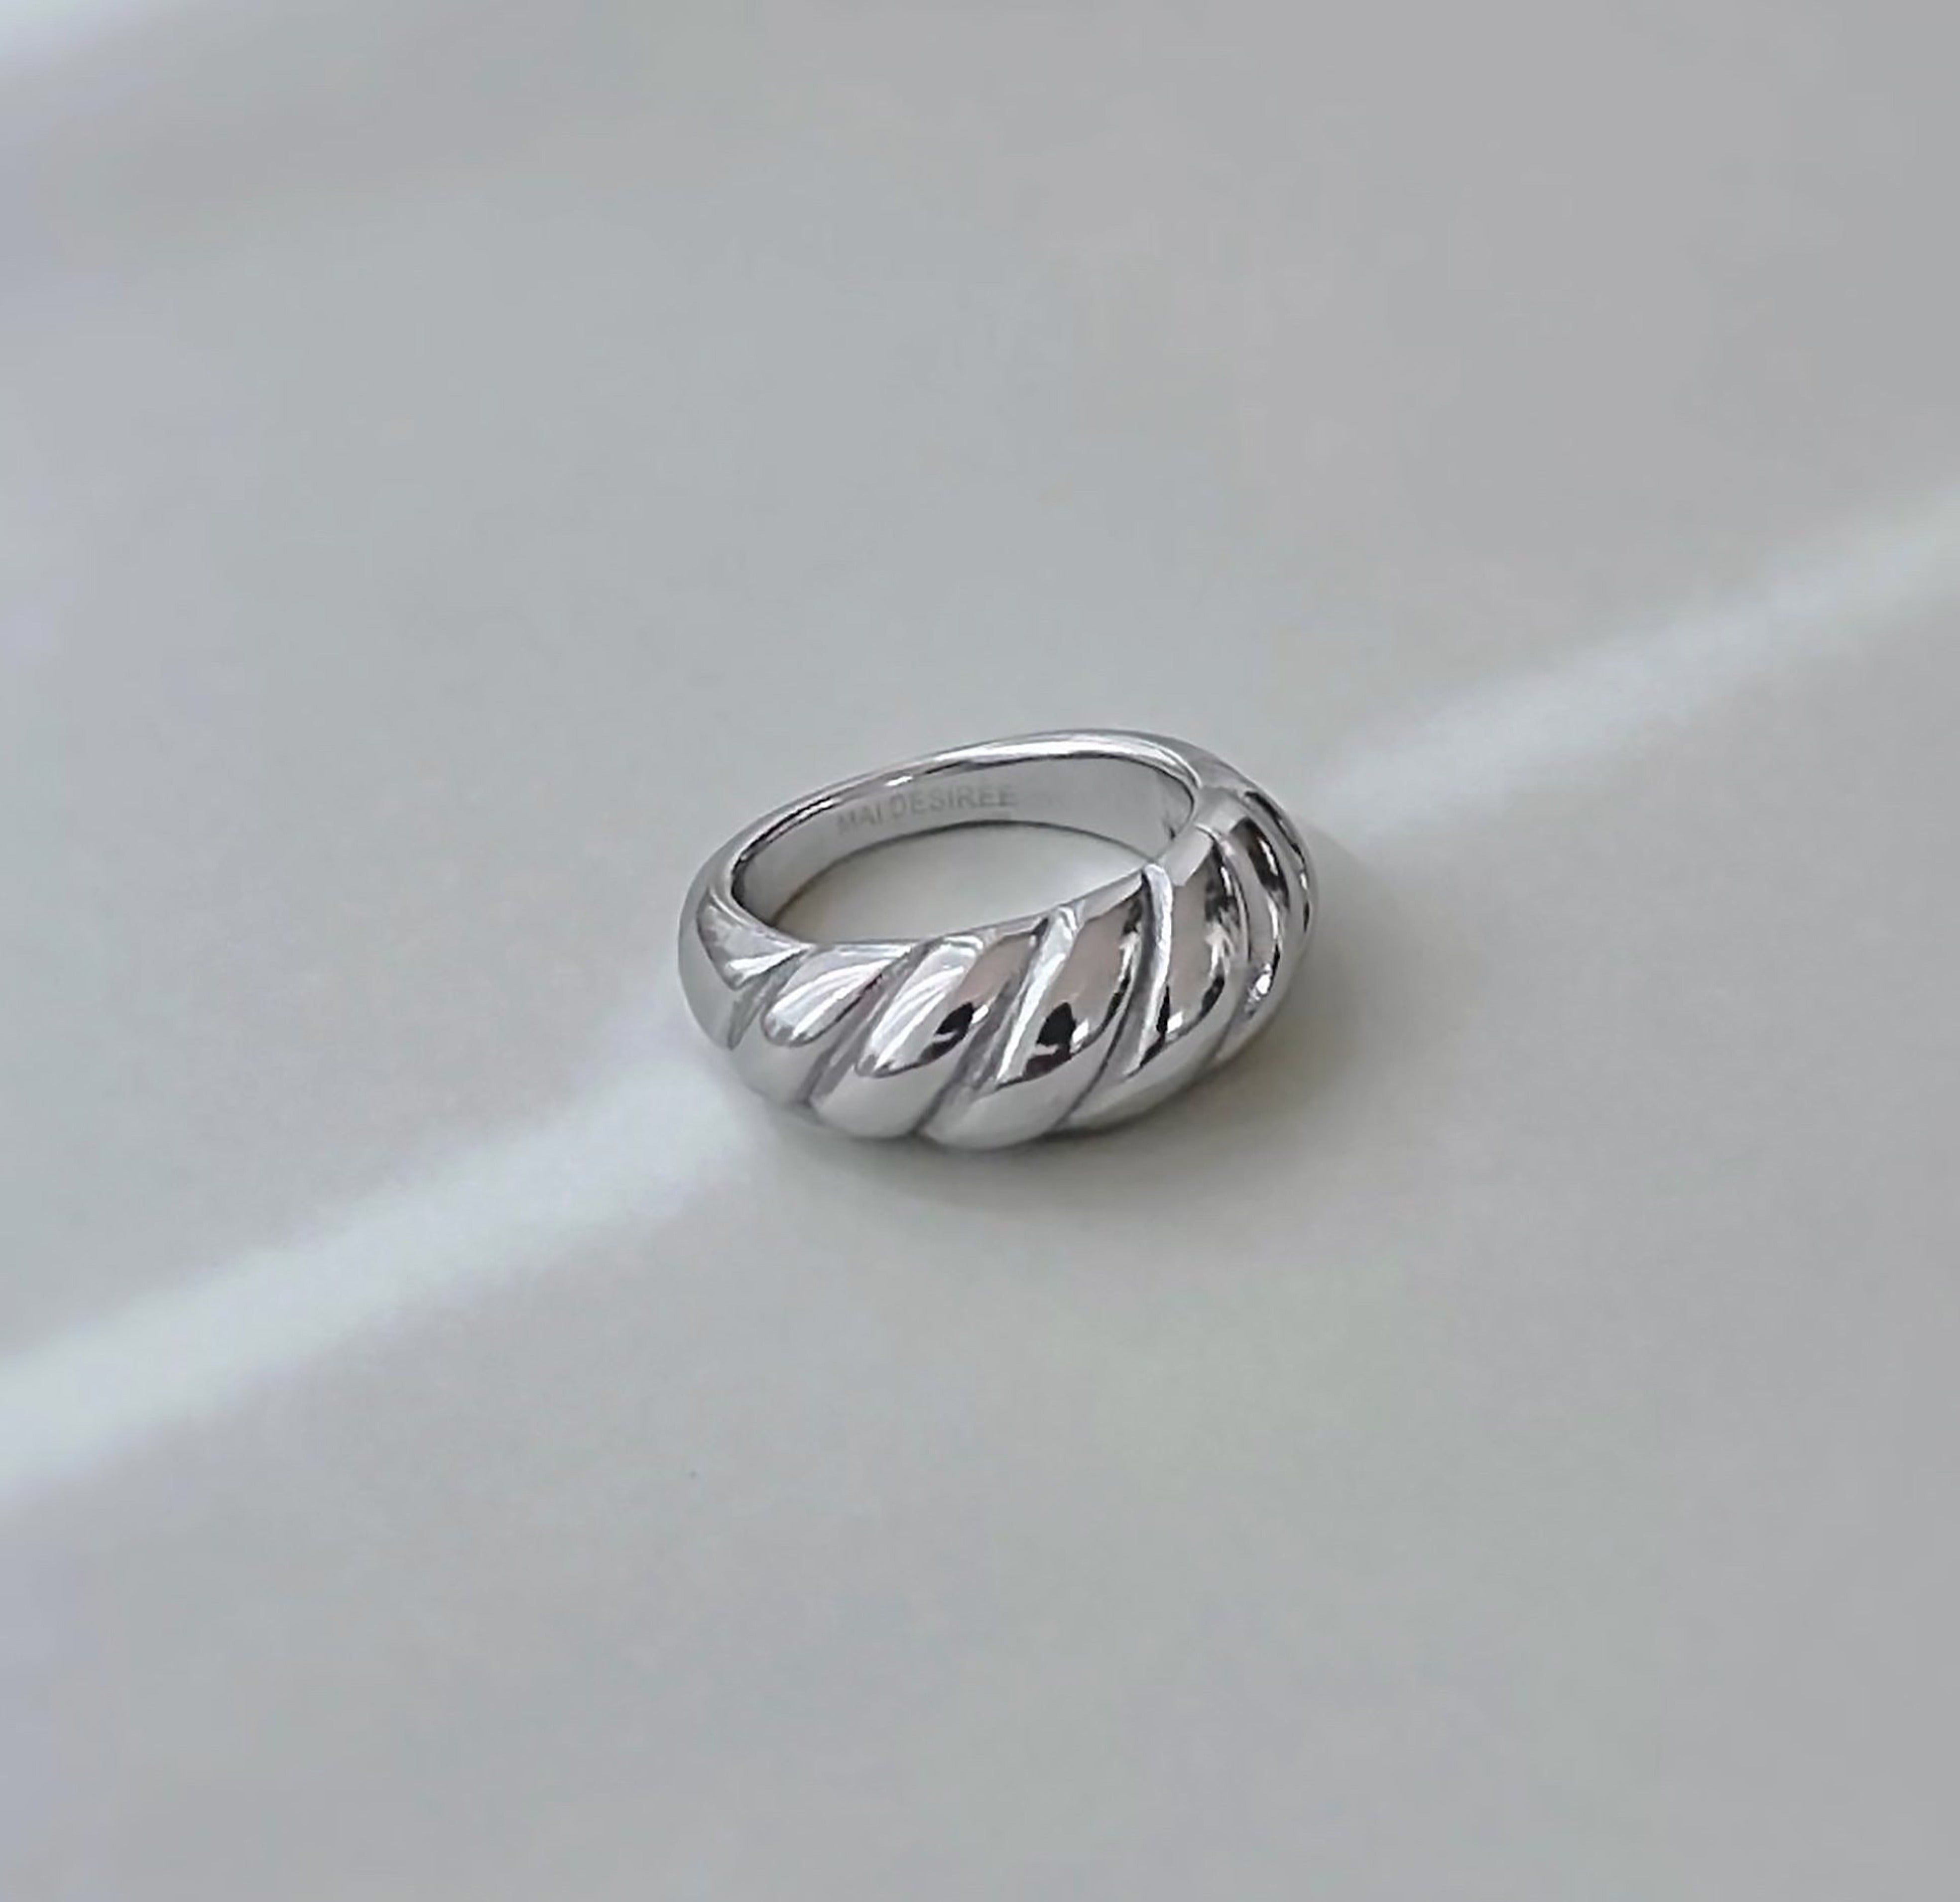 Silver classic croissant ring. Waterproof rings